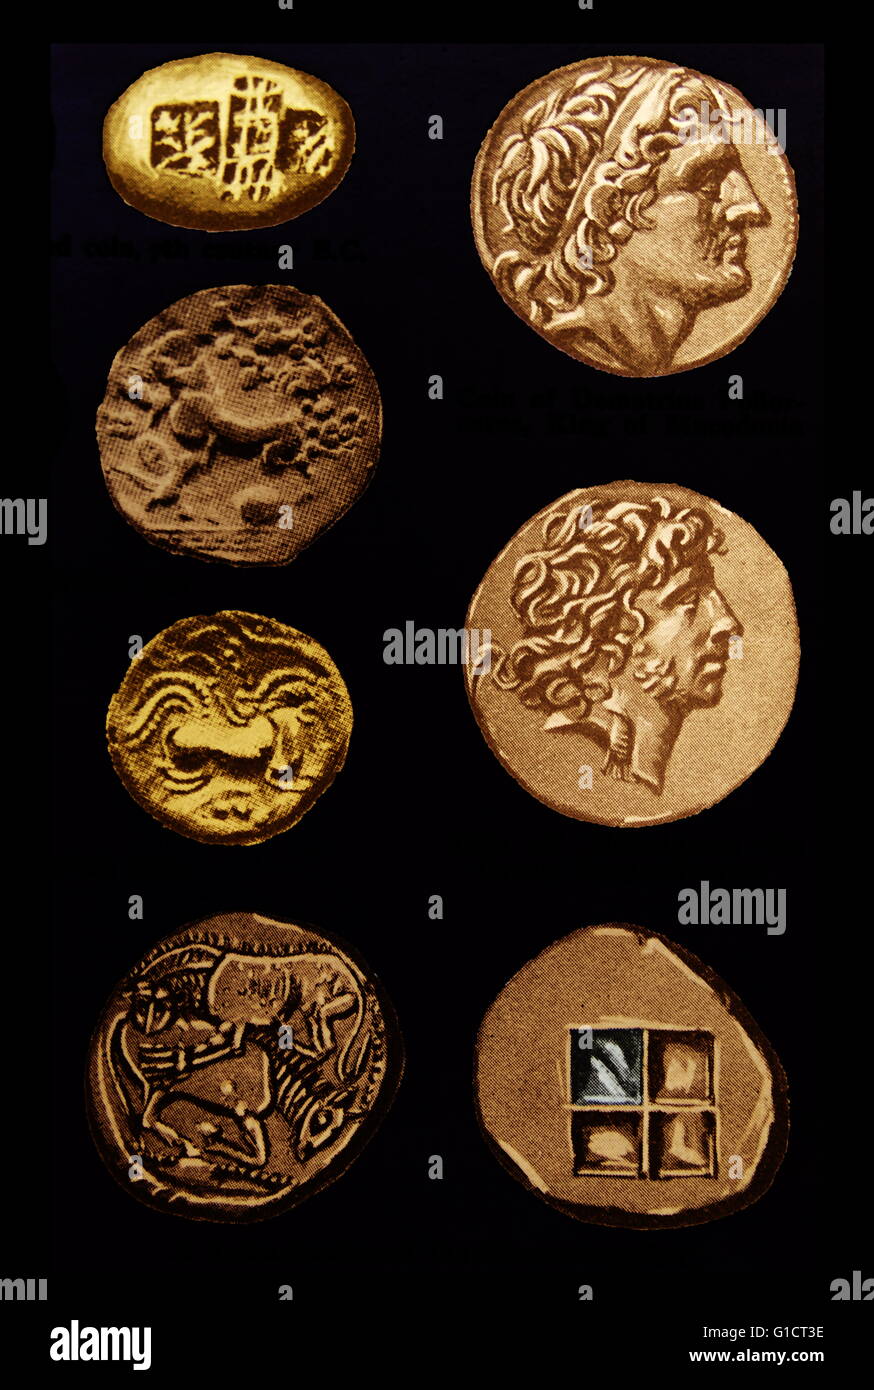 Collection of gold coins from ancient Greece Stock Photo